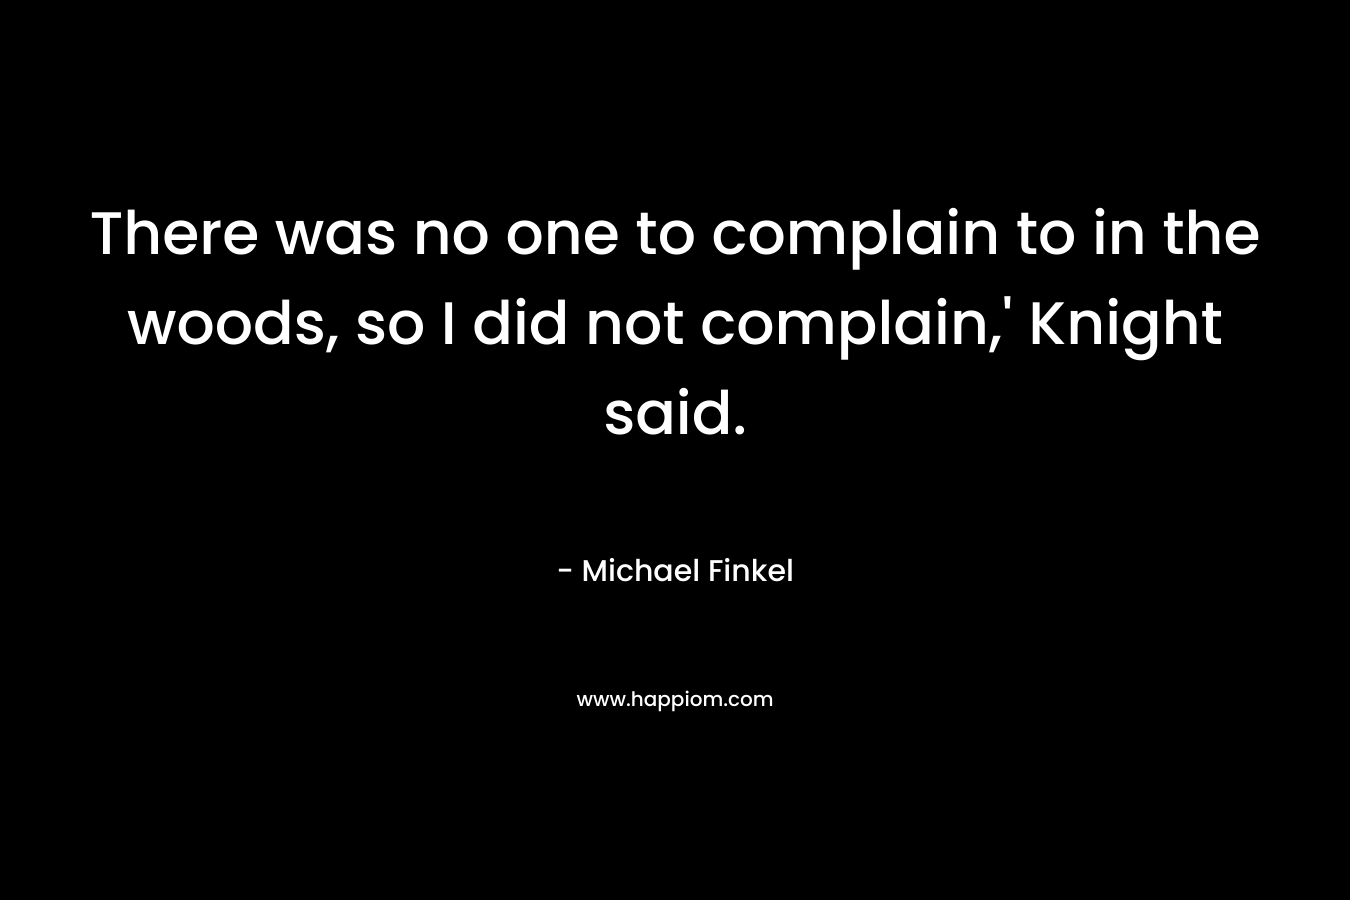 There was no one to complain to in the woods, so I did not complain,’ Knight said. – Michael Finkel